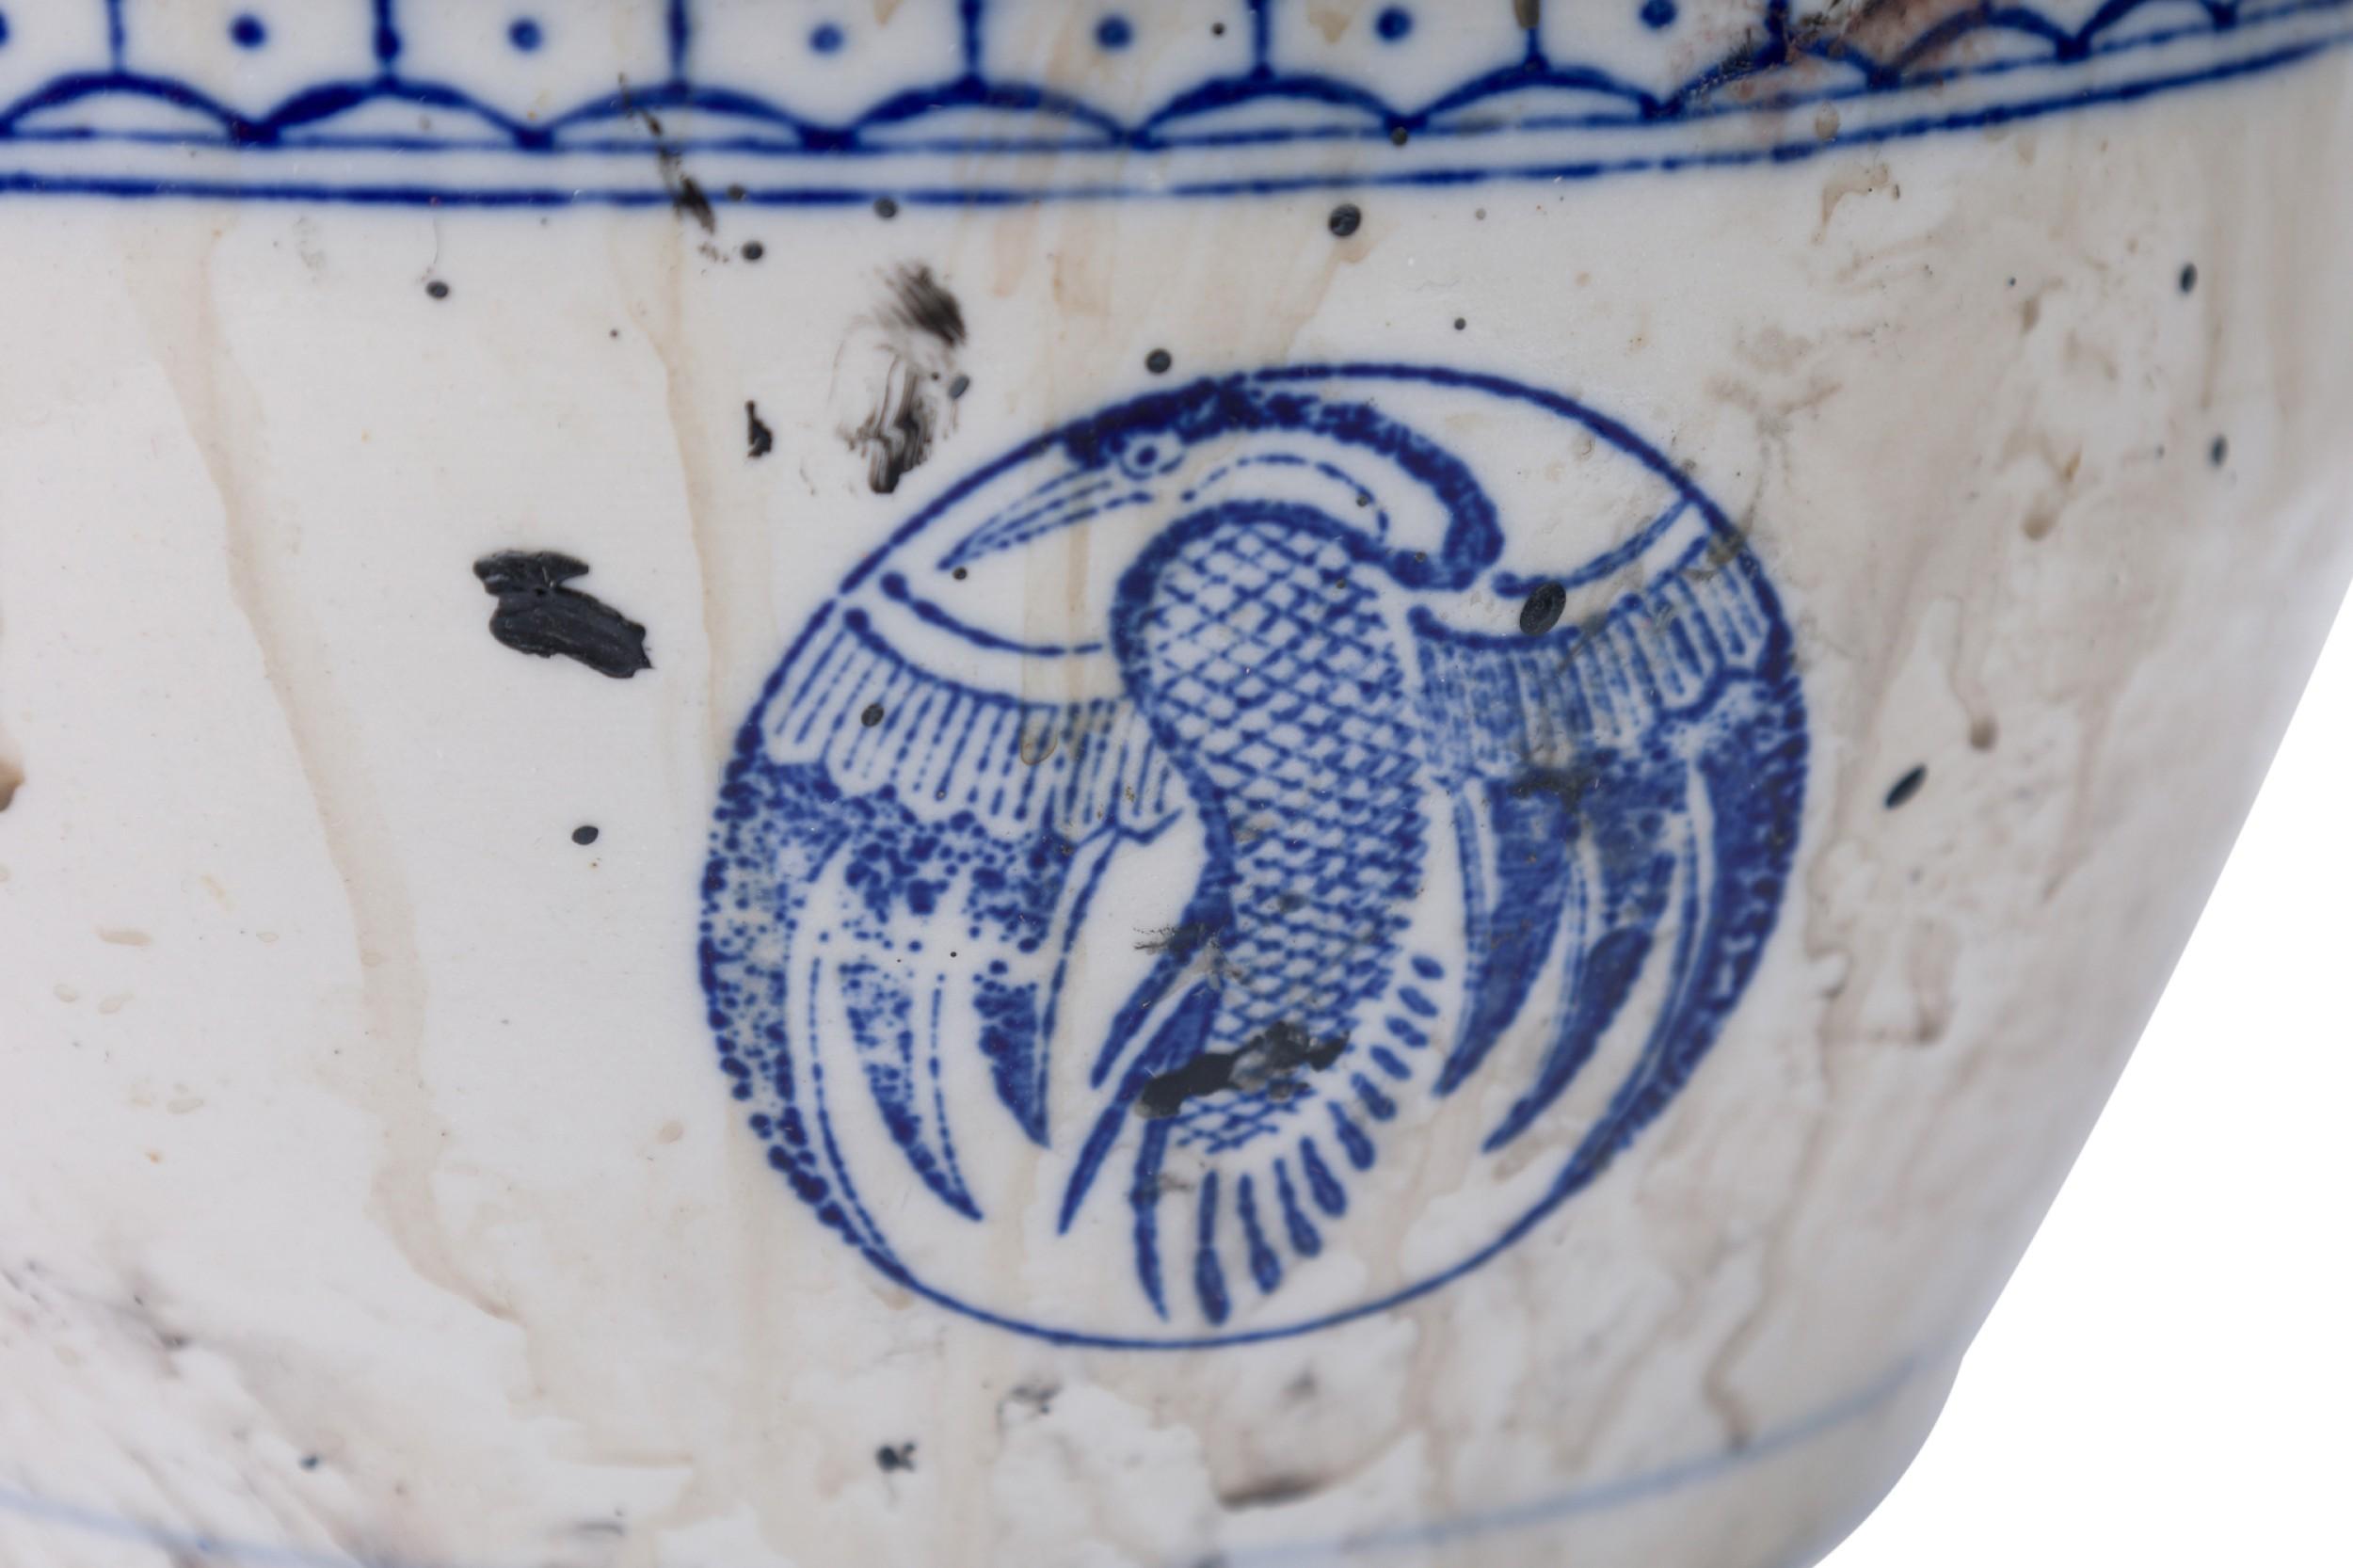 PAIR of Chinese blue & white porcelain covered bowls featuring identical painted bird medallions. The larger bowl was fired in a stippled, textured glaze with a more flattened top and scaled up medallions. Both bowls are bordered with the same